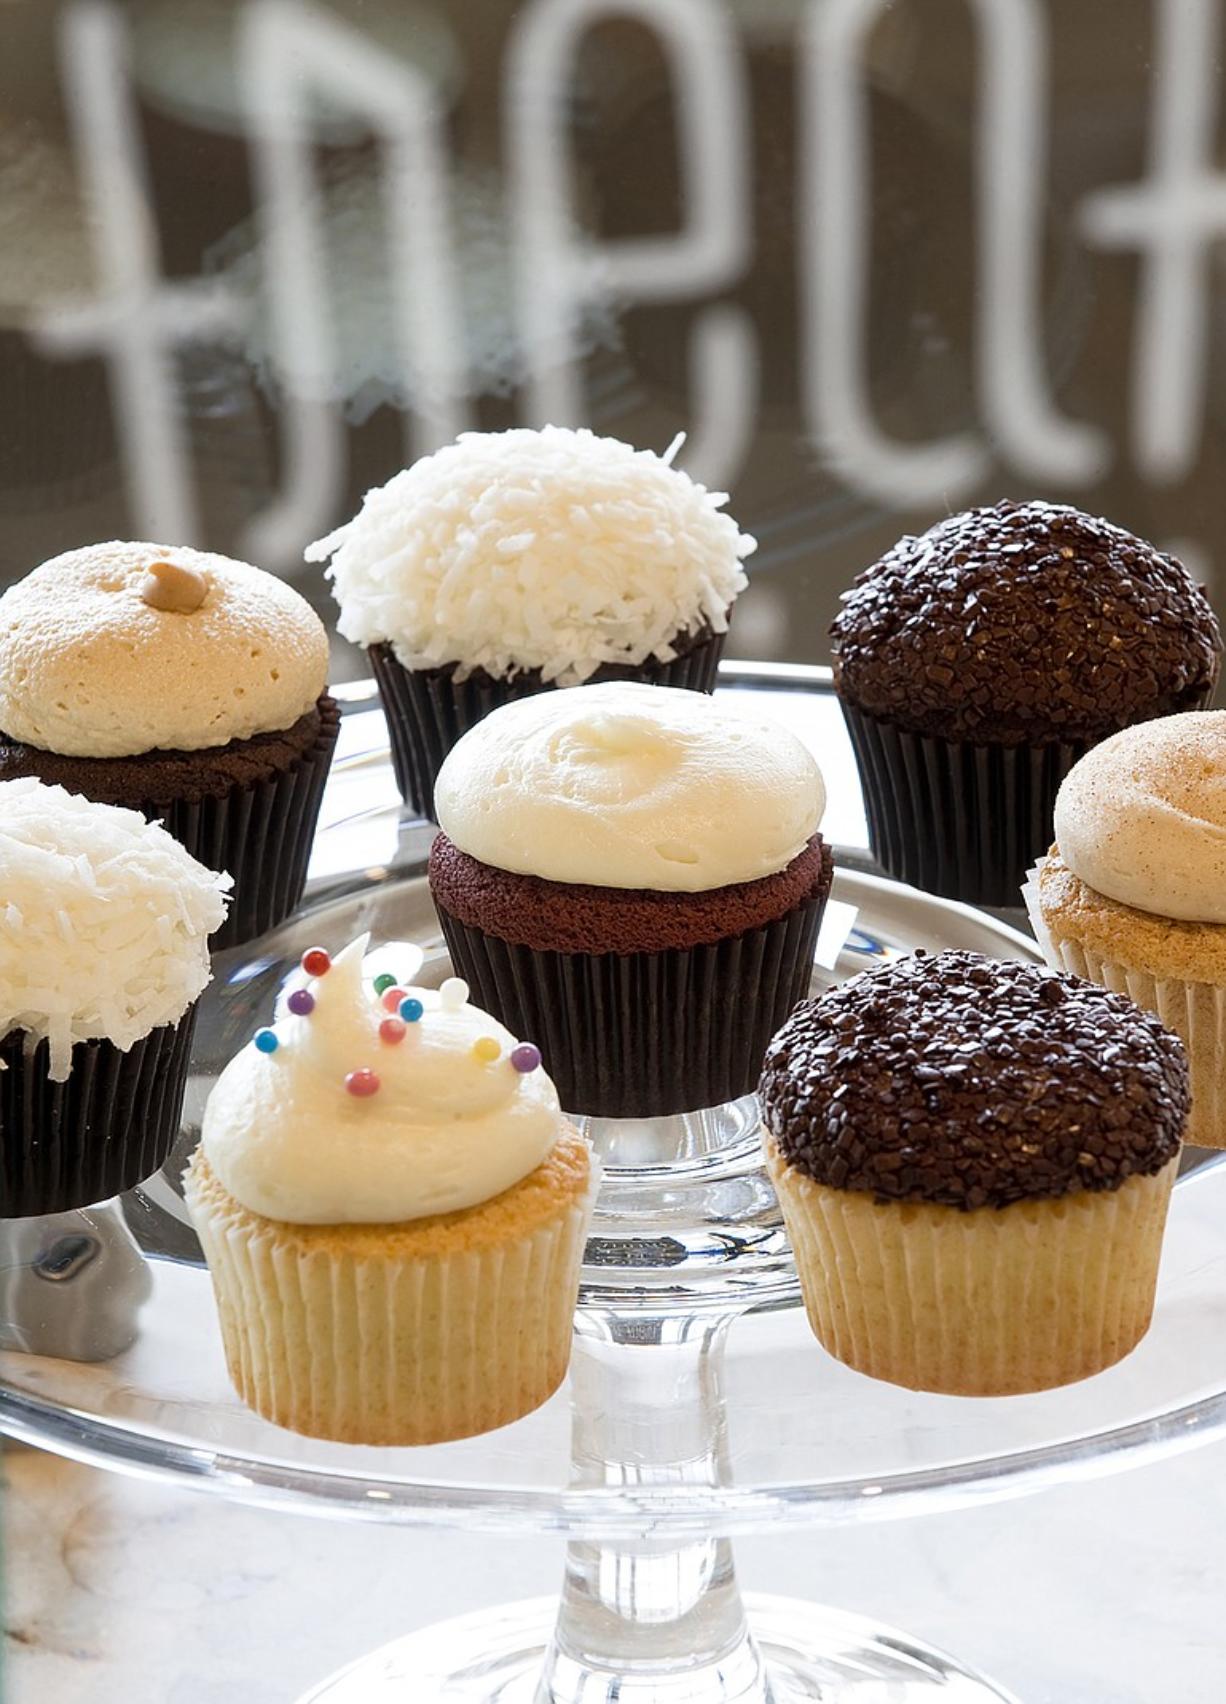 TREAT in downtown Vancouver offers eight daily varieties of cupcakes, in both seasonal and traditional flavors.